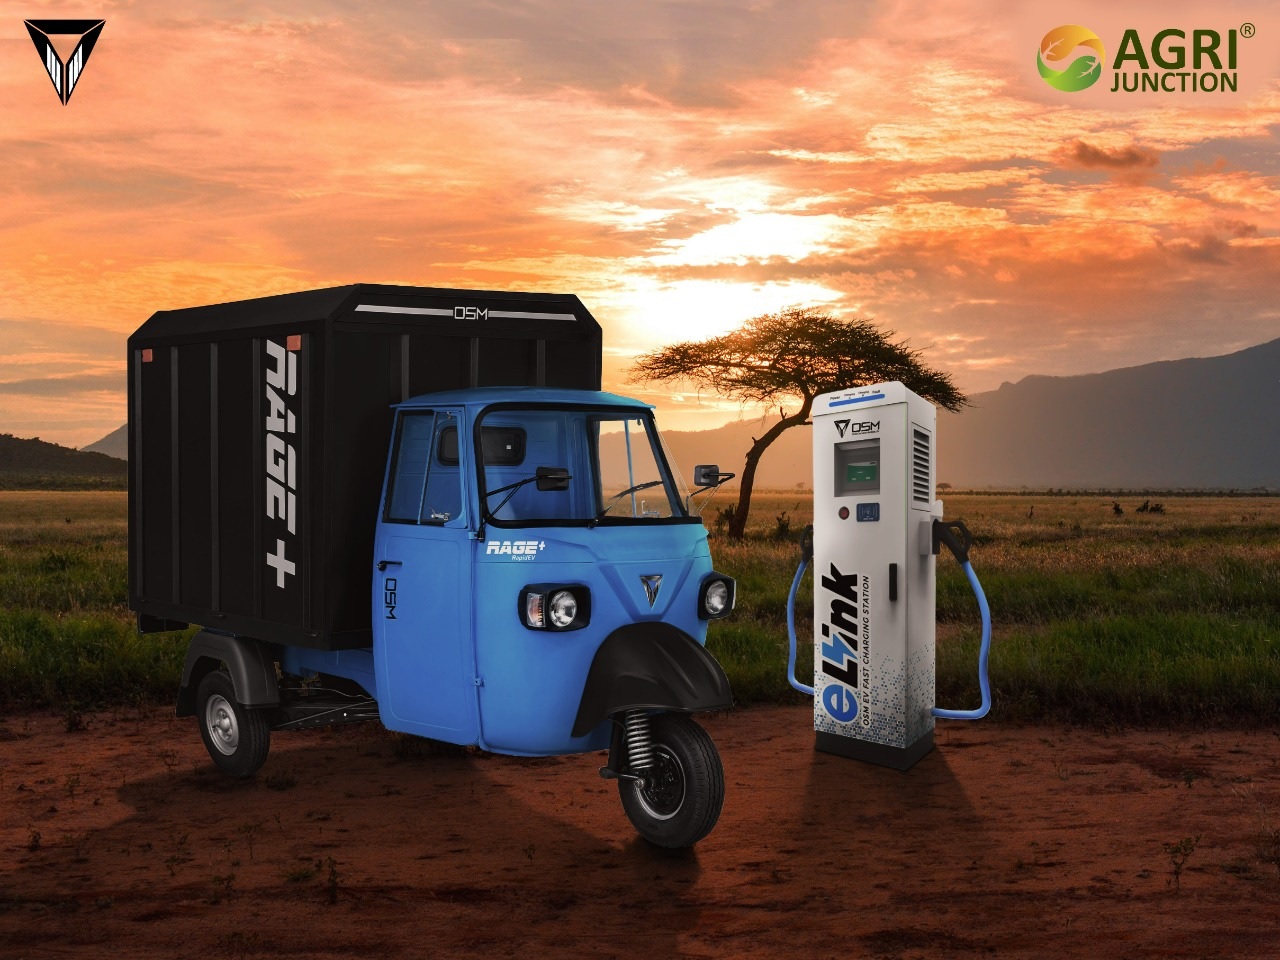 Omega Seiki Mobility (OSM) partners with Agri Junction, To deploy pollution-free green solutions in Tier II and III markets PAN India